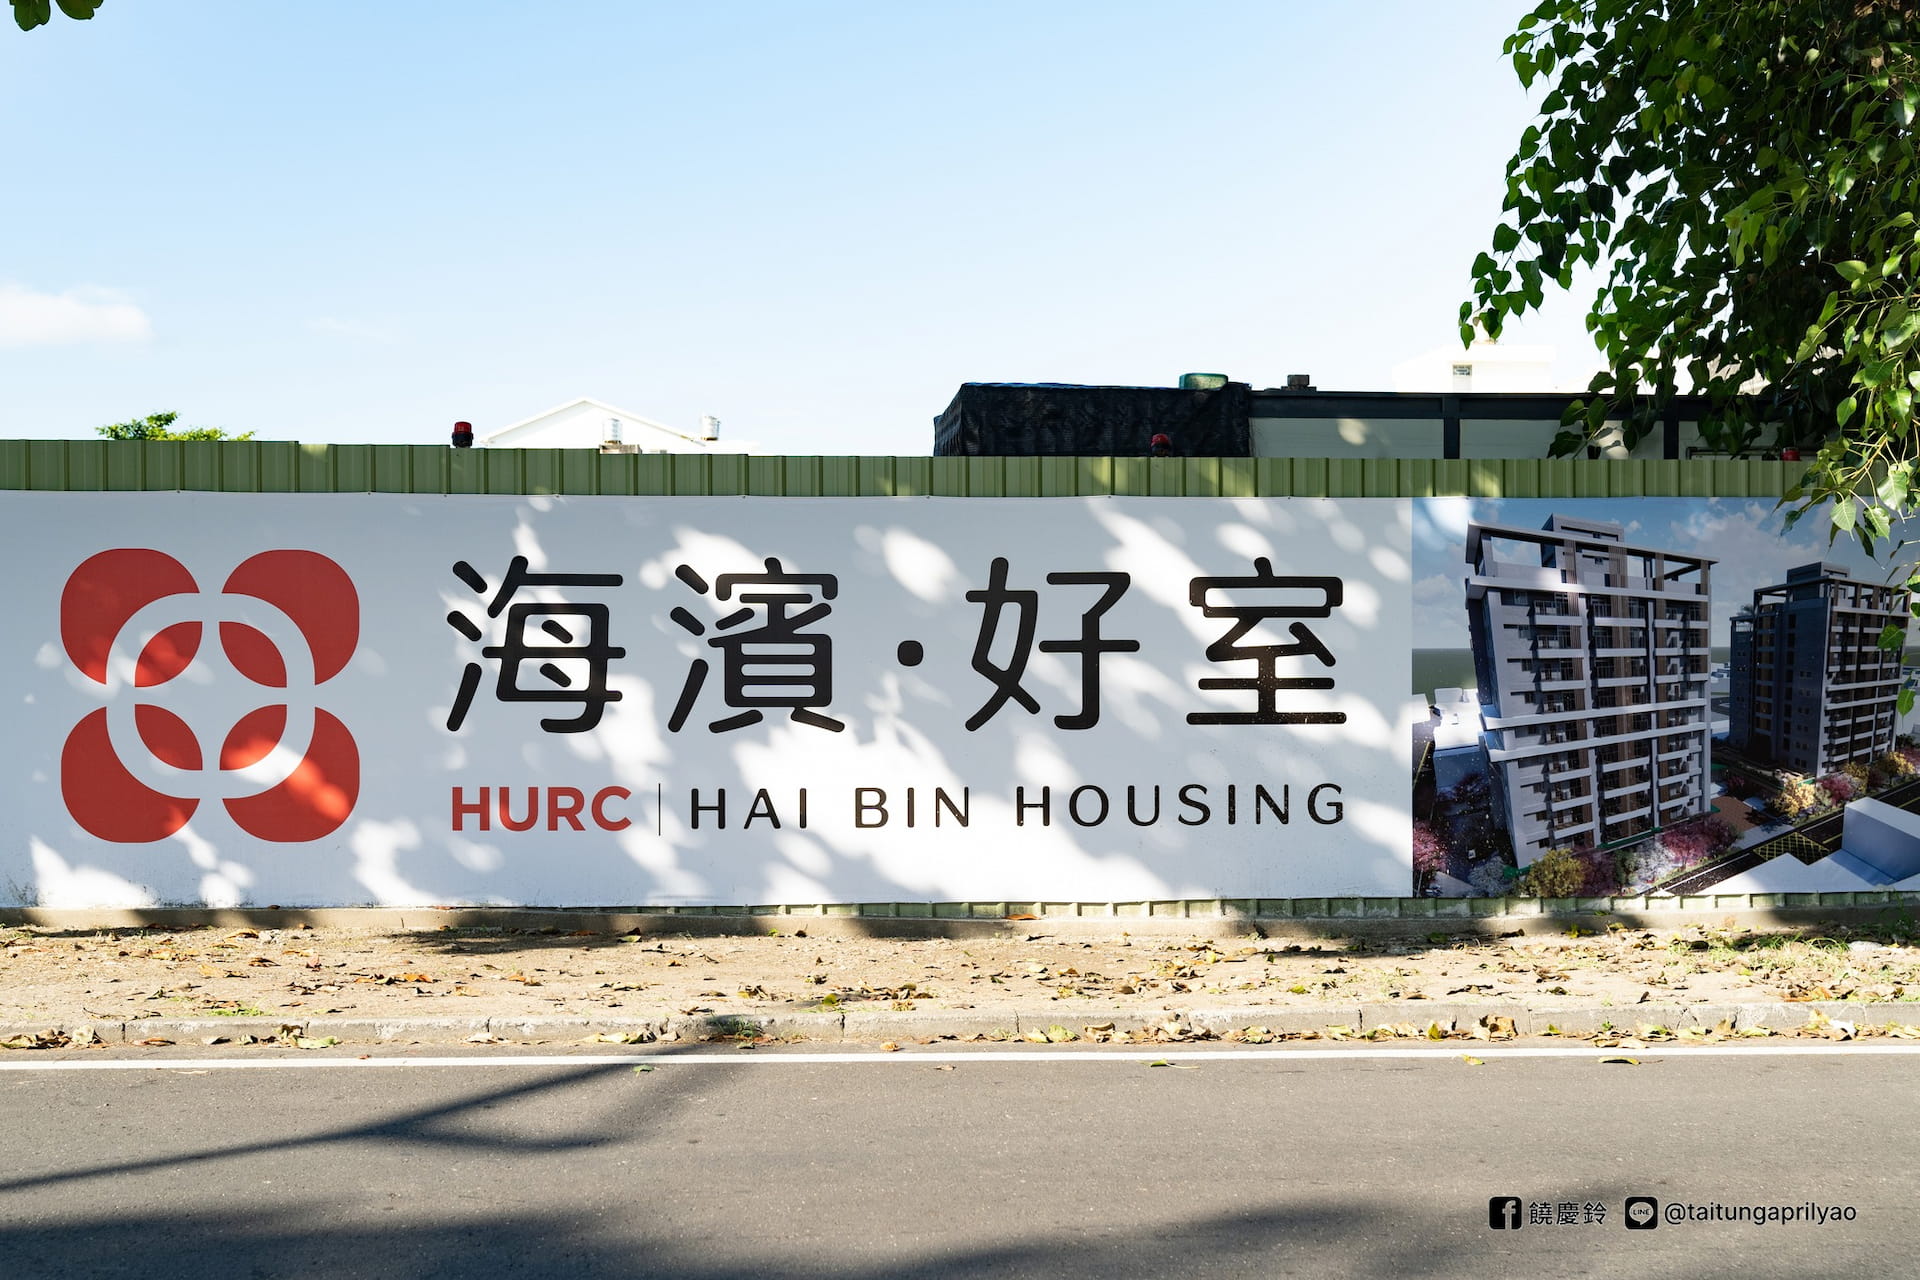 Taitung—a Great Place to Call Home; County Government Builds Housing to Create a City of Happiness